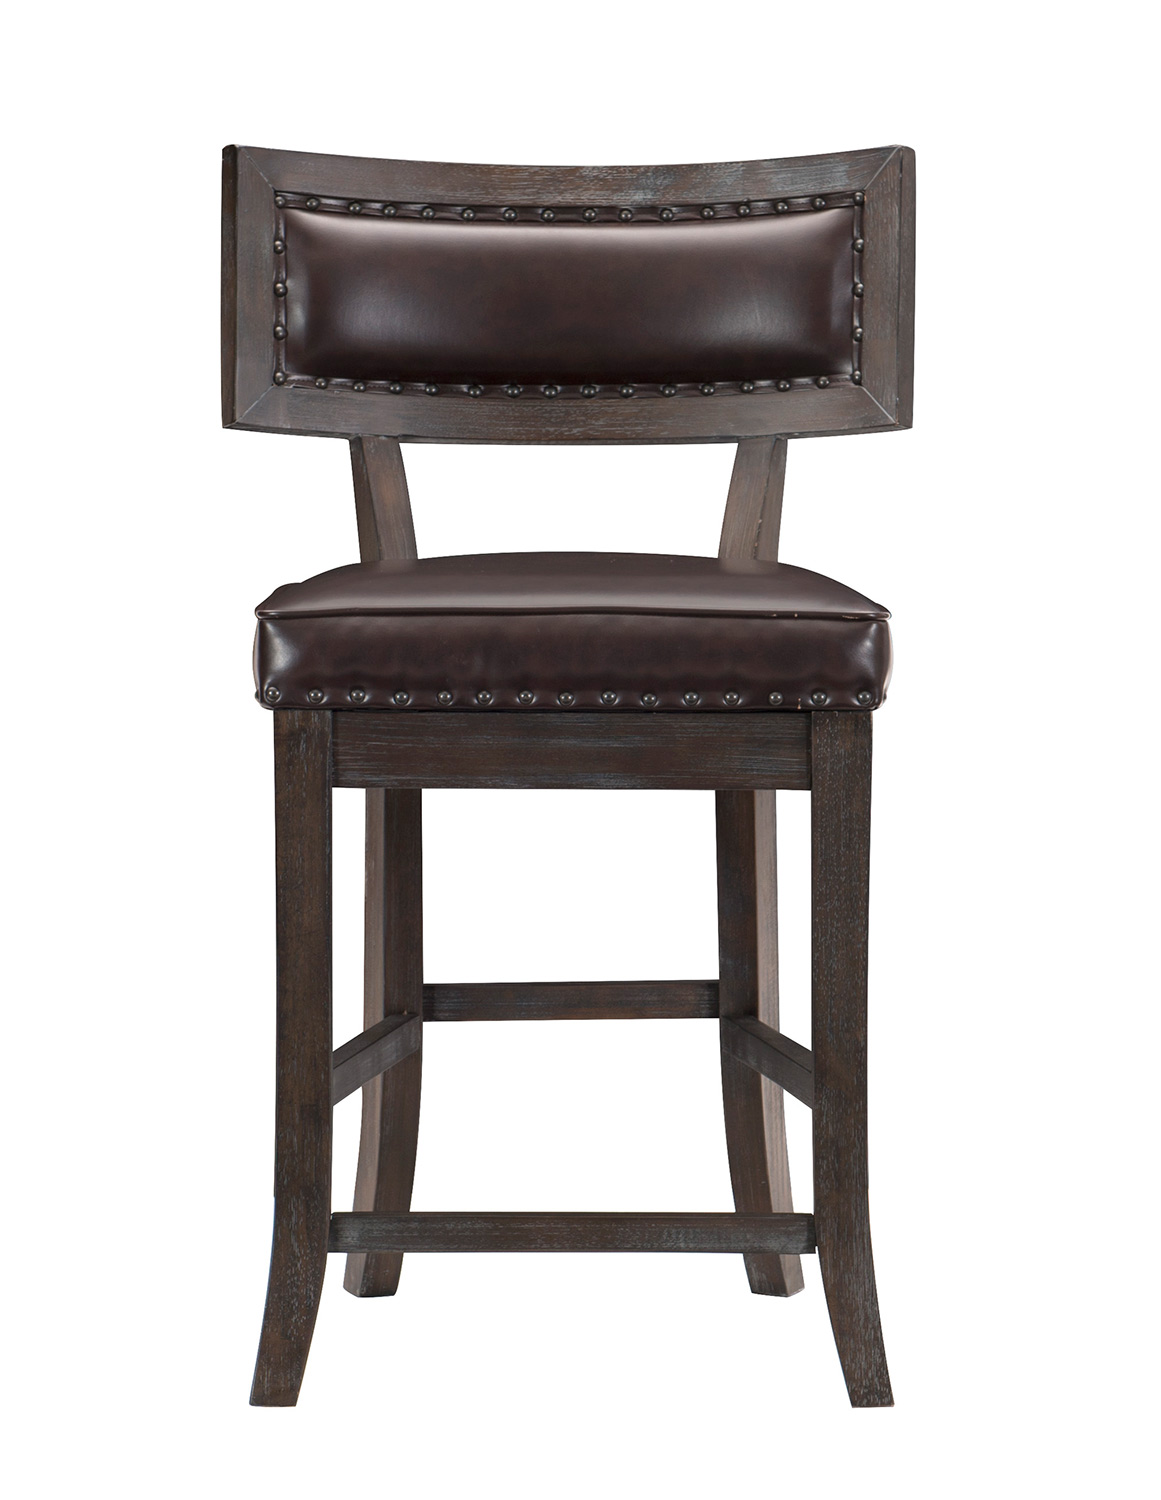 Homelegance Oxton Counter Height Chair - Rustic Brown